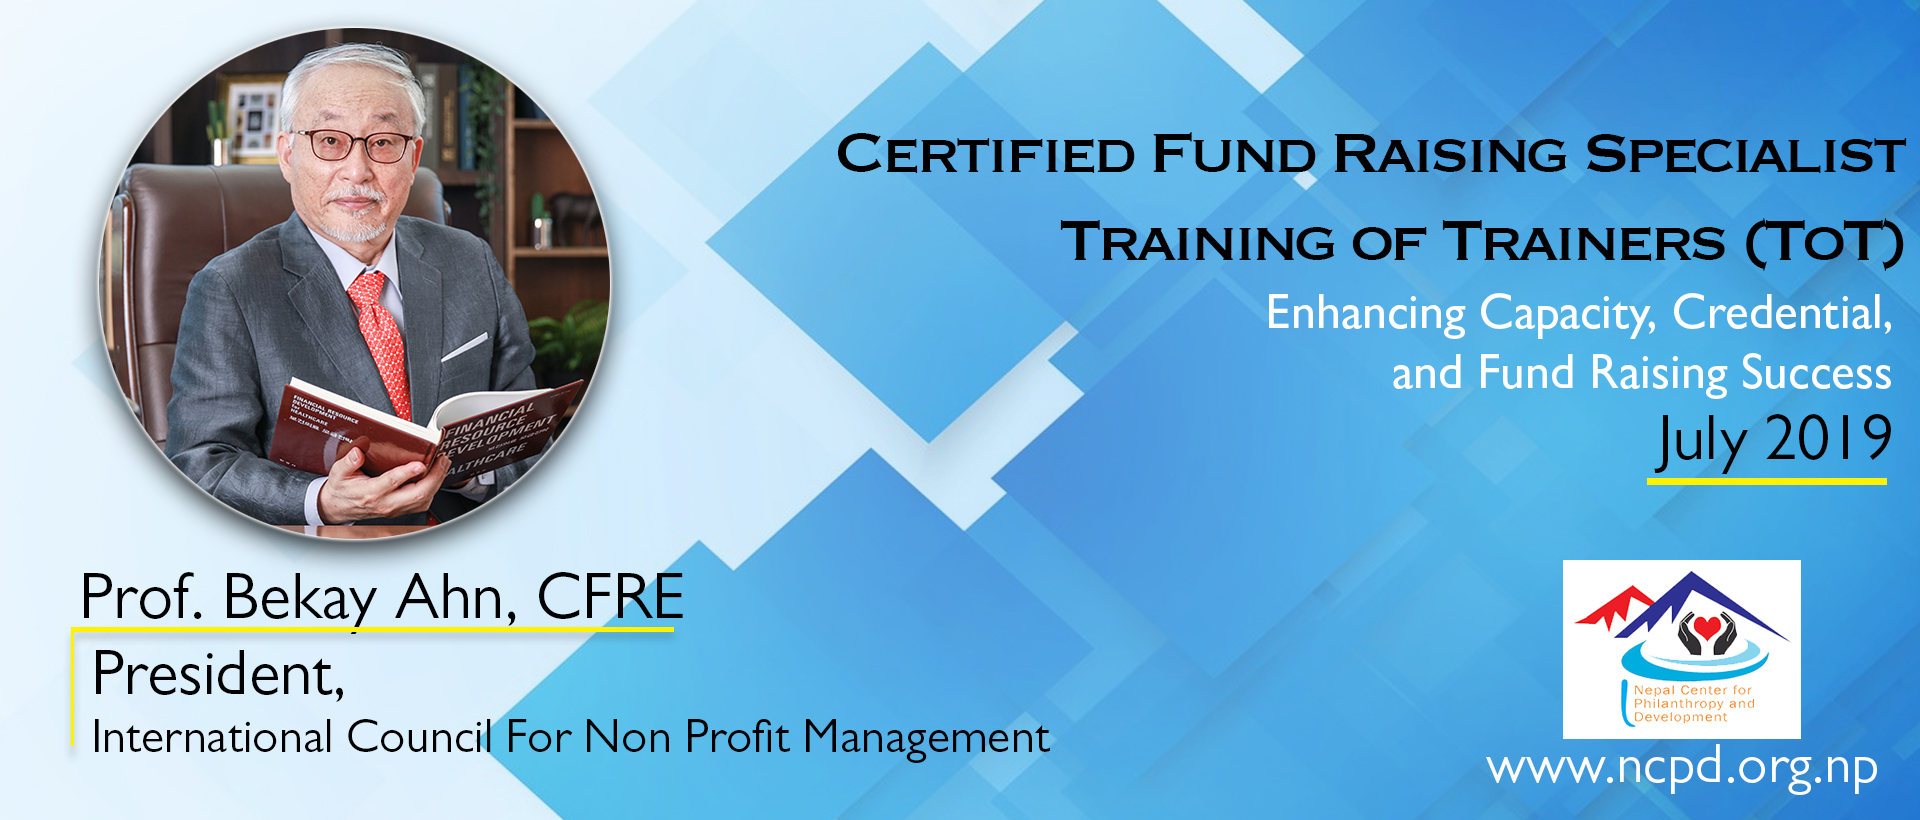 Course Announcement Certified Fund Raising Specialist (CFRS) Training of Trainers (ToT)